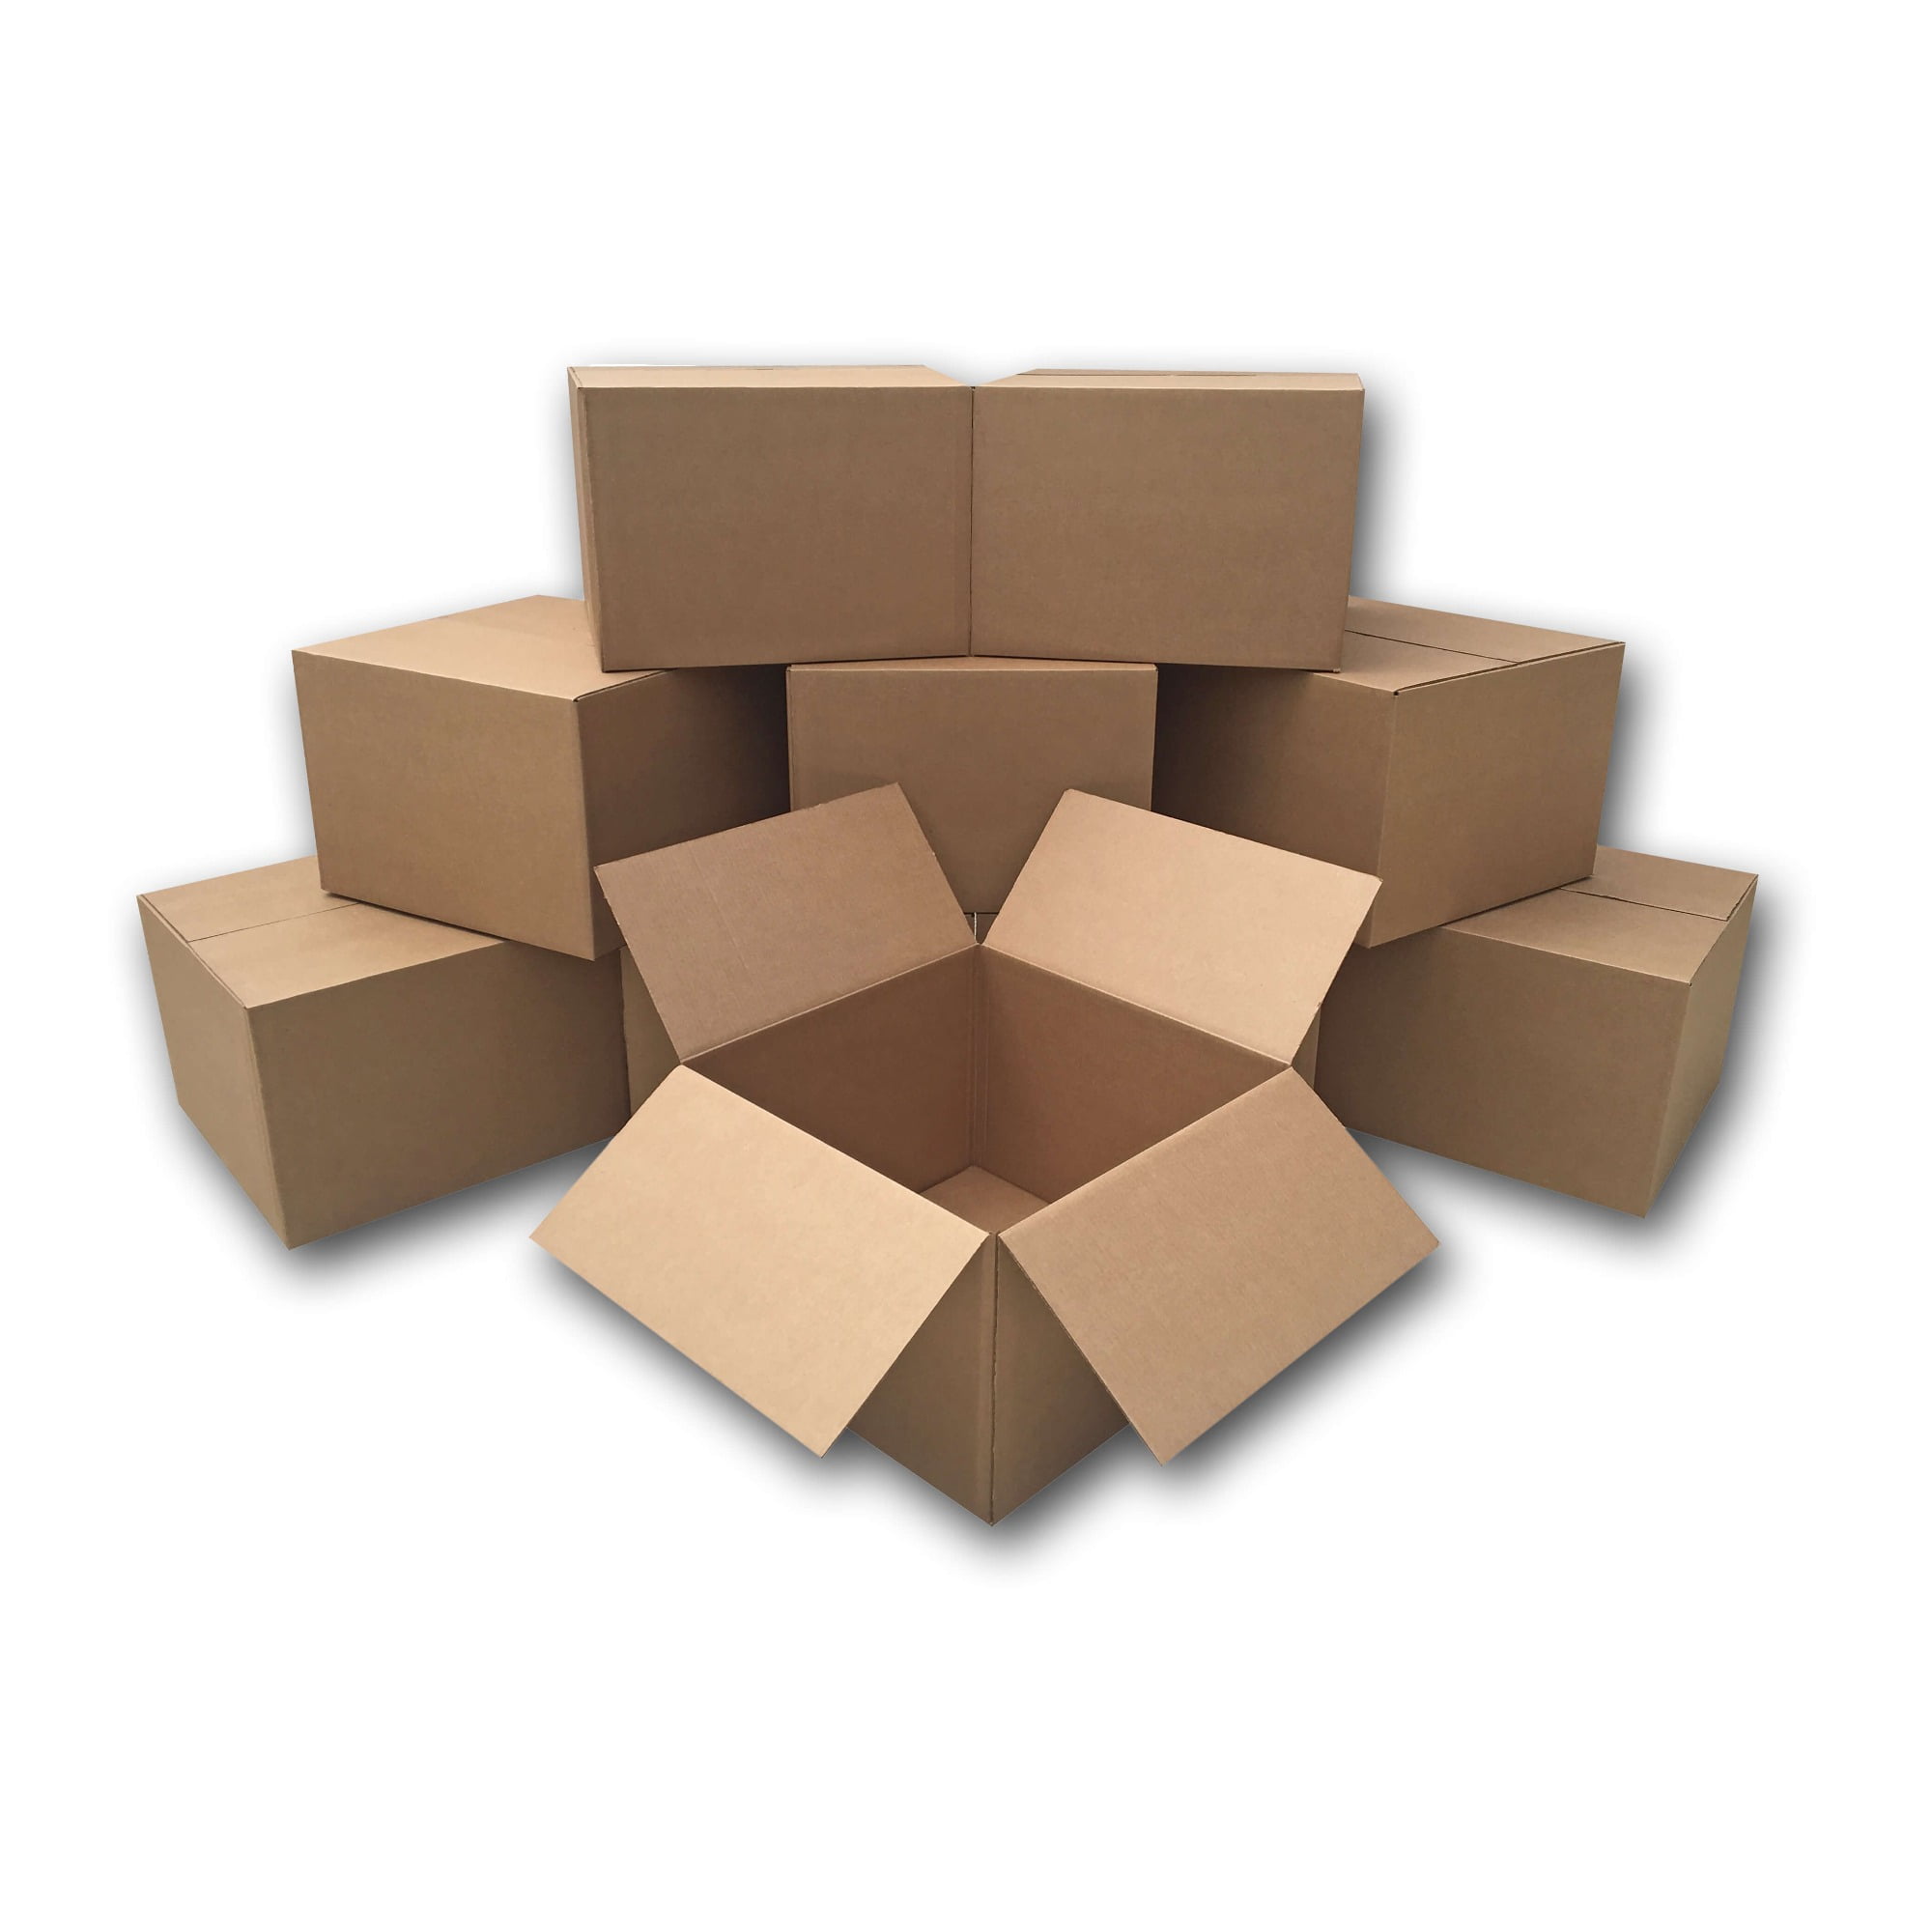 20 x STRONG A4 FILING ARCHIVE STORAGE REMOVAL CARDBOARD BOXES WITH HANDLES 24HRS 